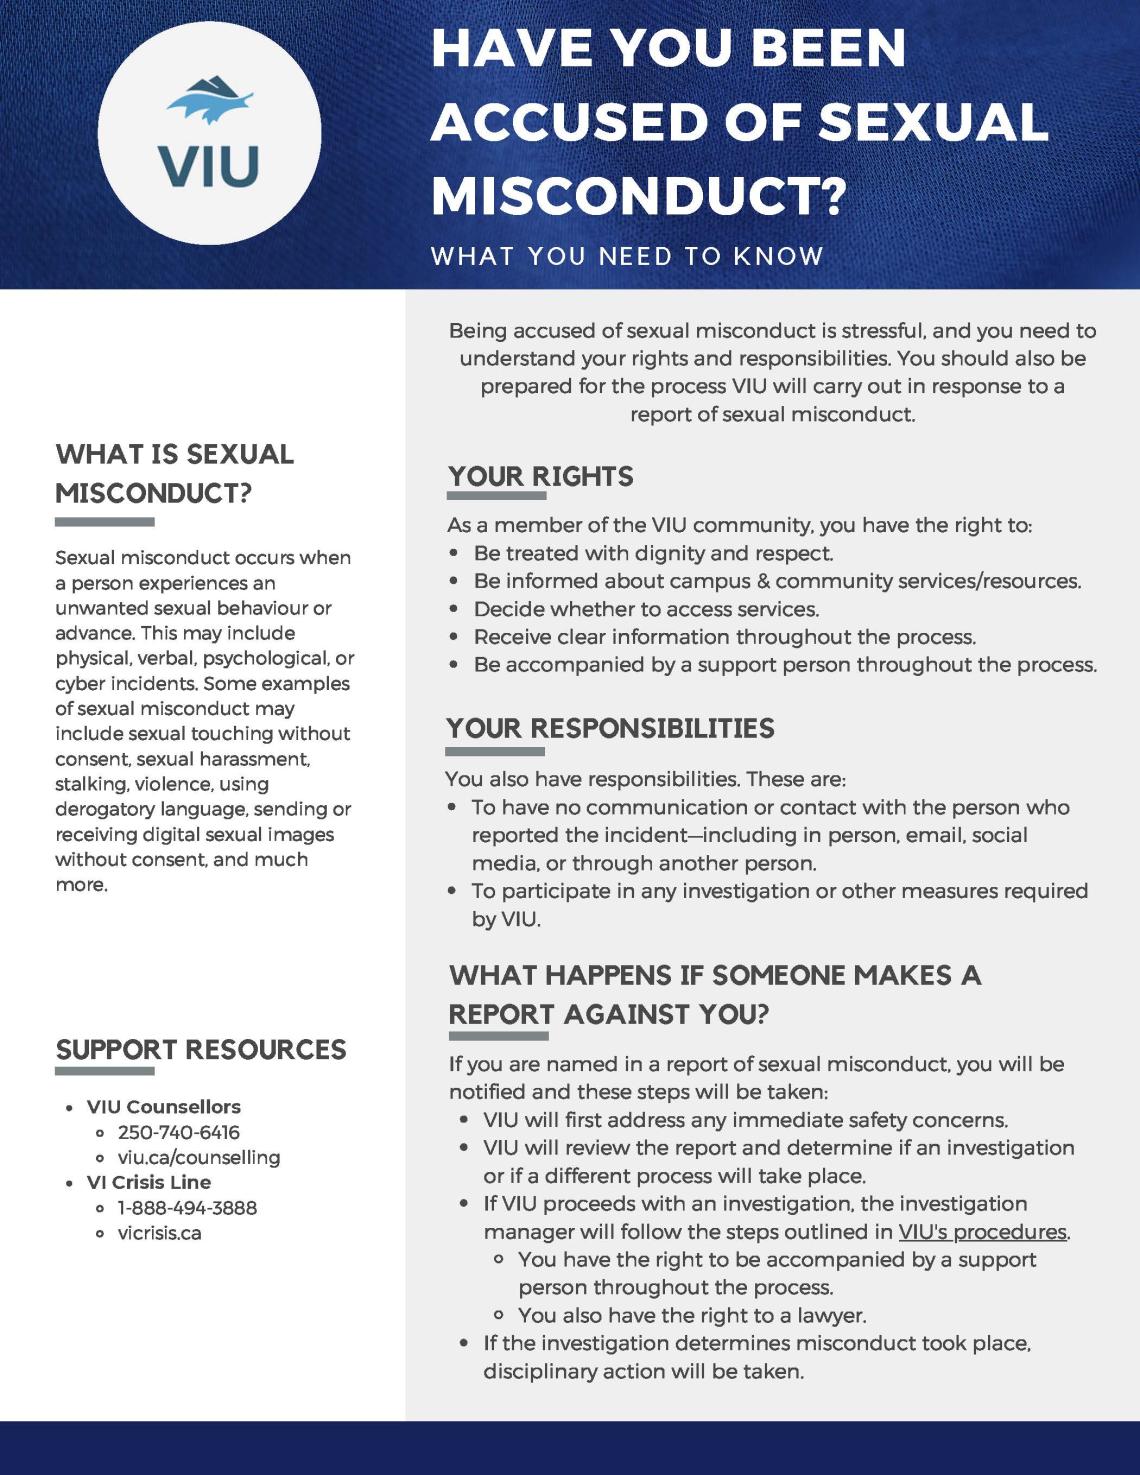 One Page Guide for People Who Have Been Accused of Sexual Misconduct